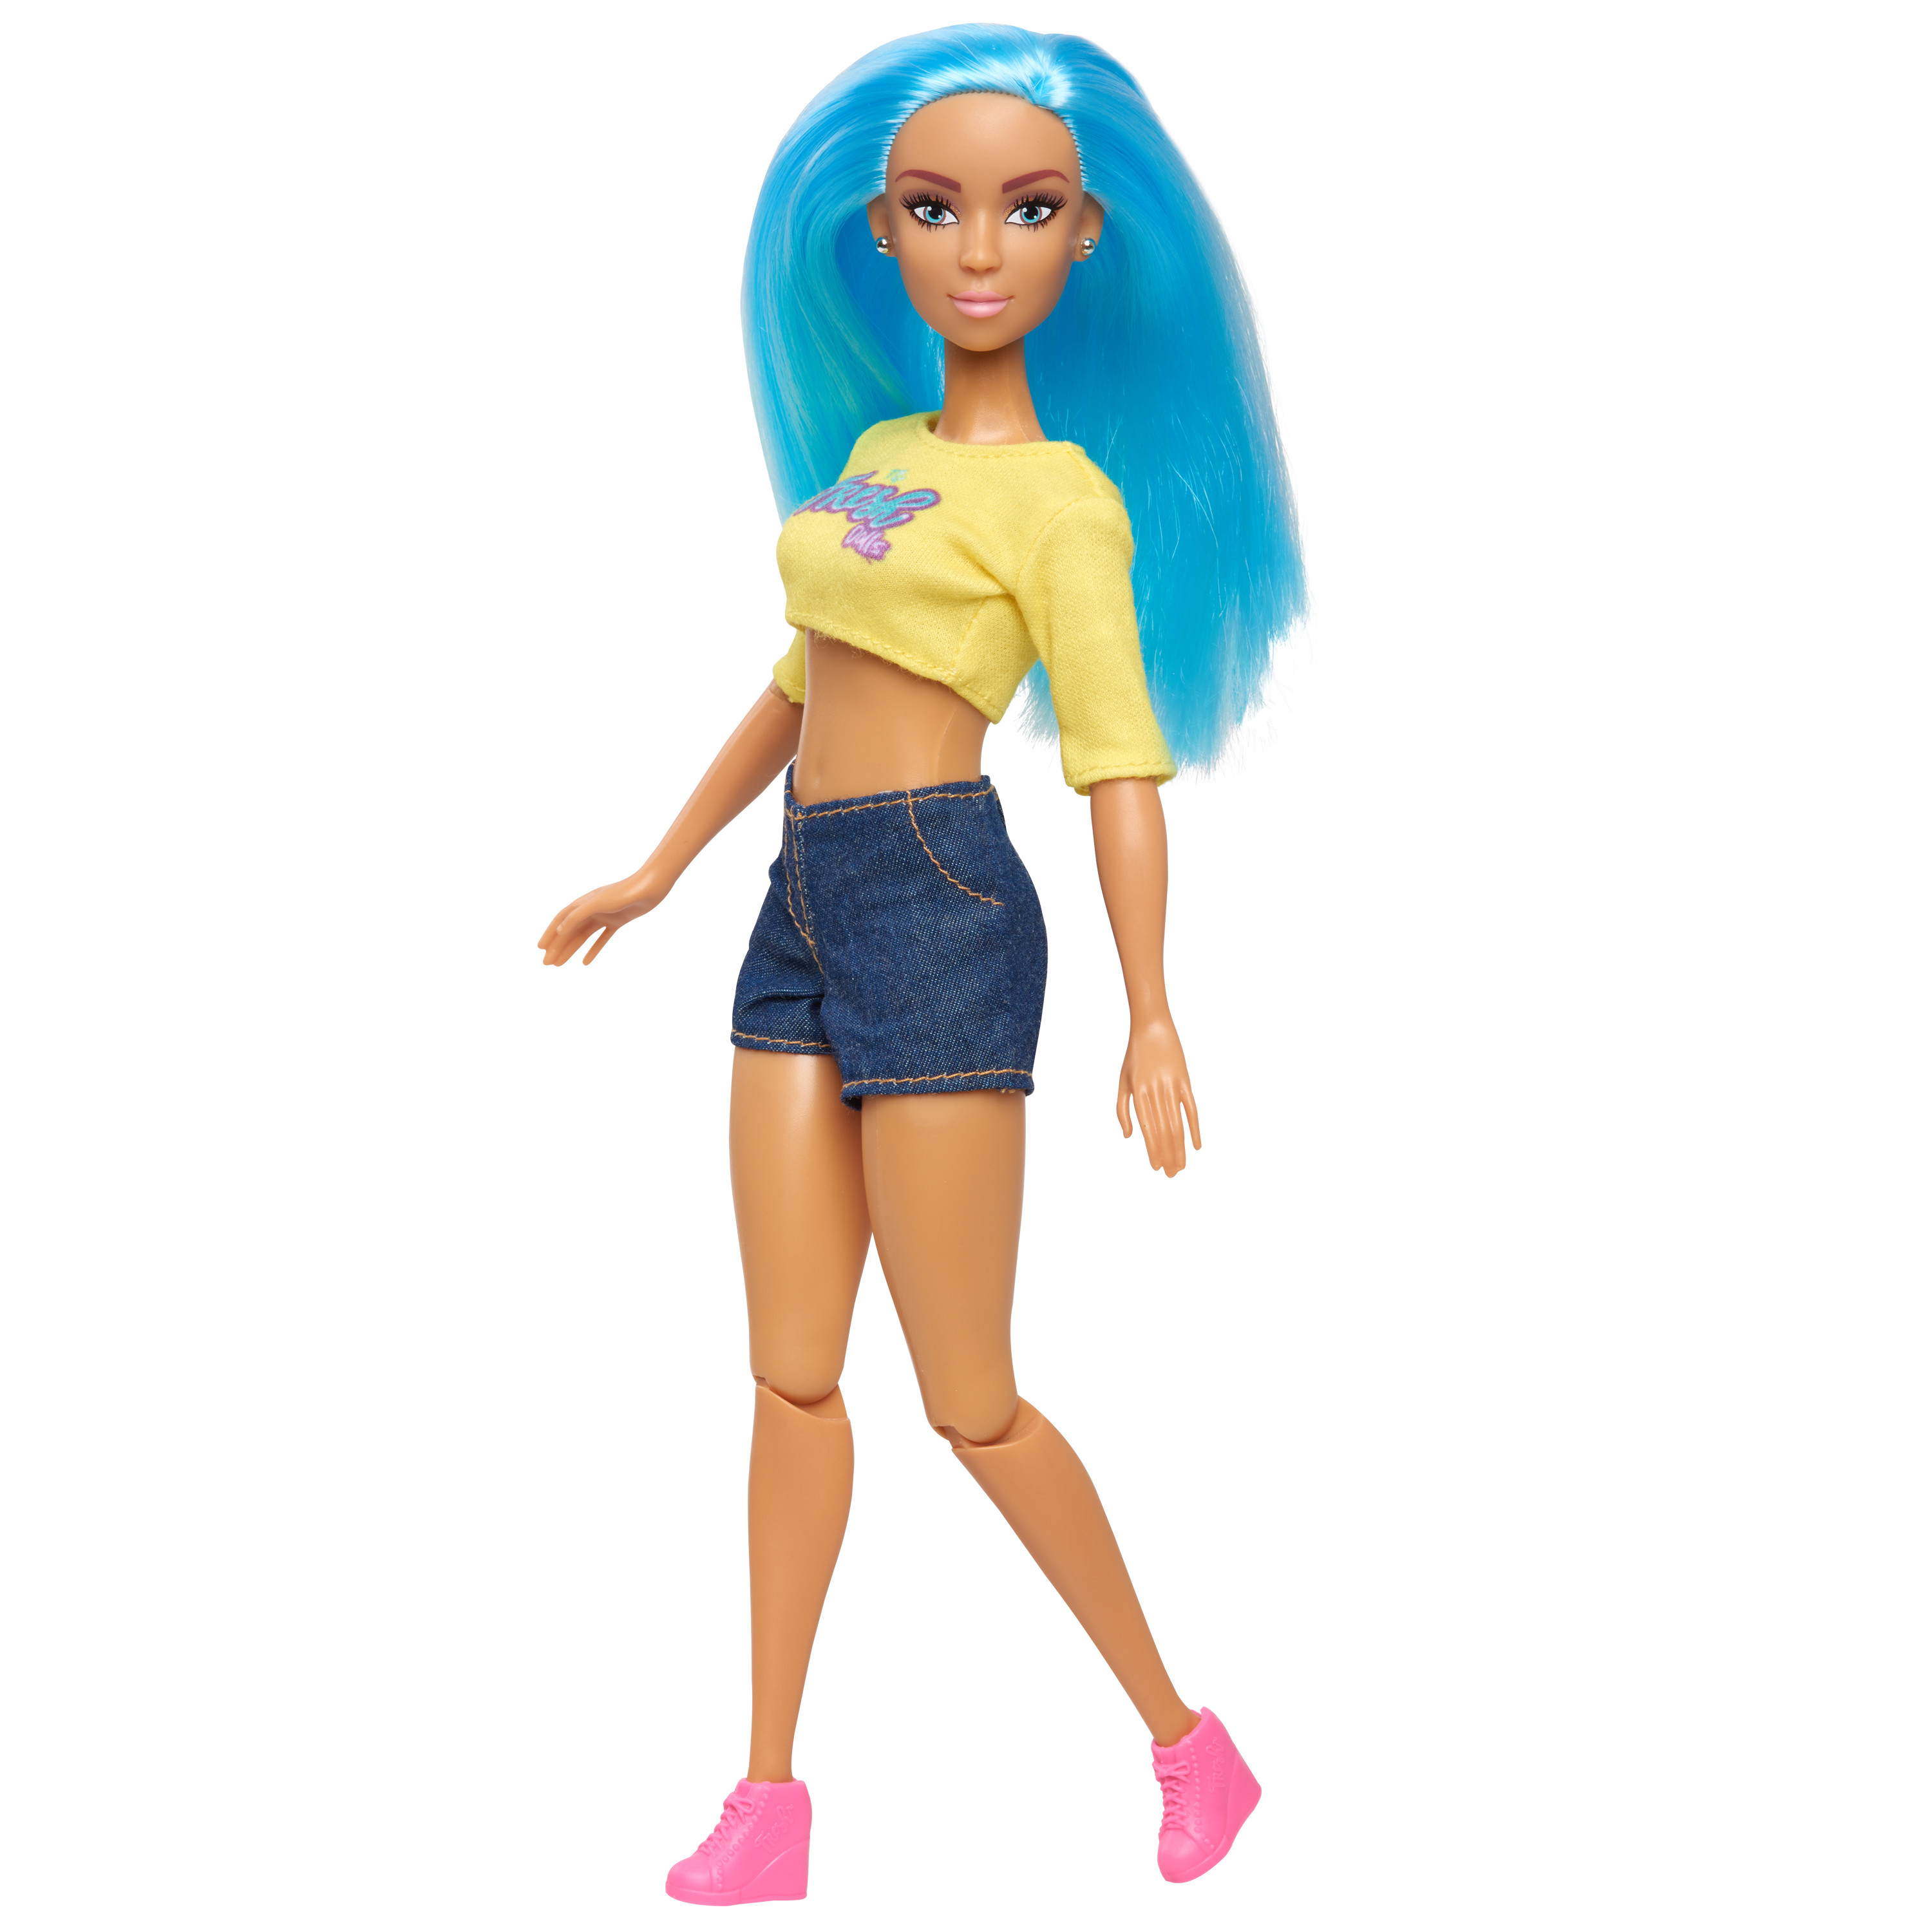 Fresh Dolls Skylar Fashion Doll, 11.5-inches tall, yellow shirt and jean shorts, blue hair,  Kids Toys for Ages 3 Up, Gifts and Presents - image 1 of 5